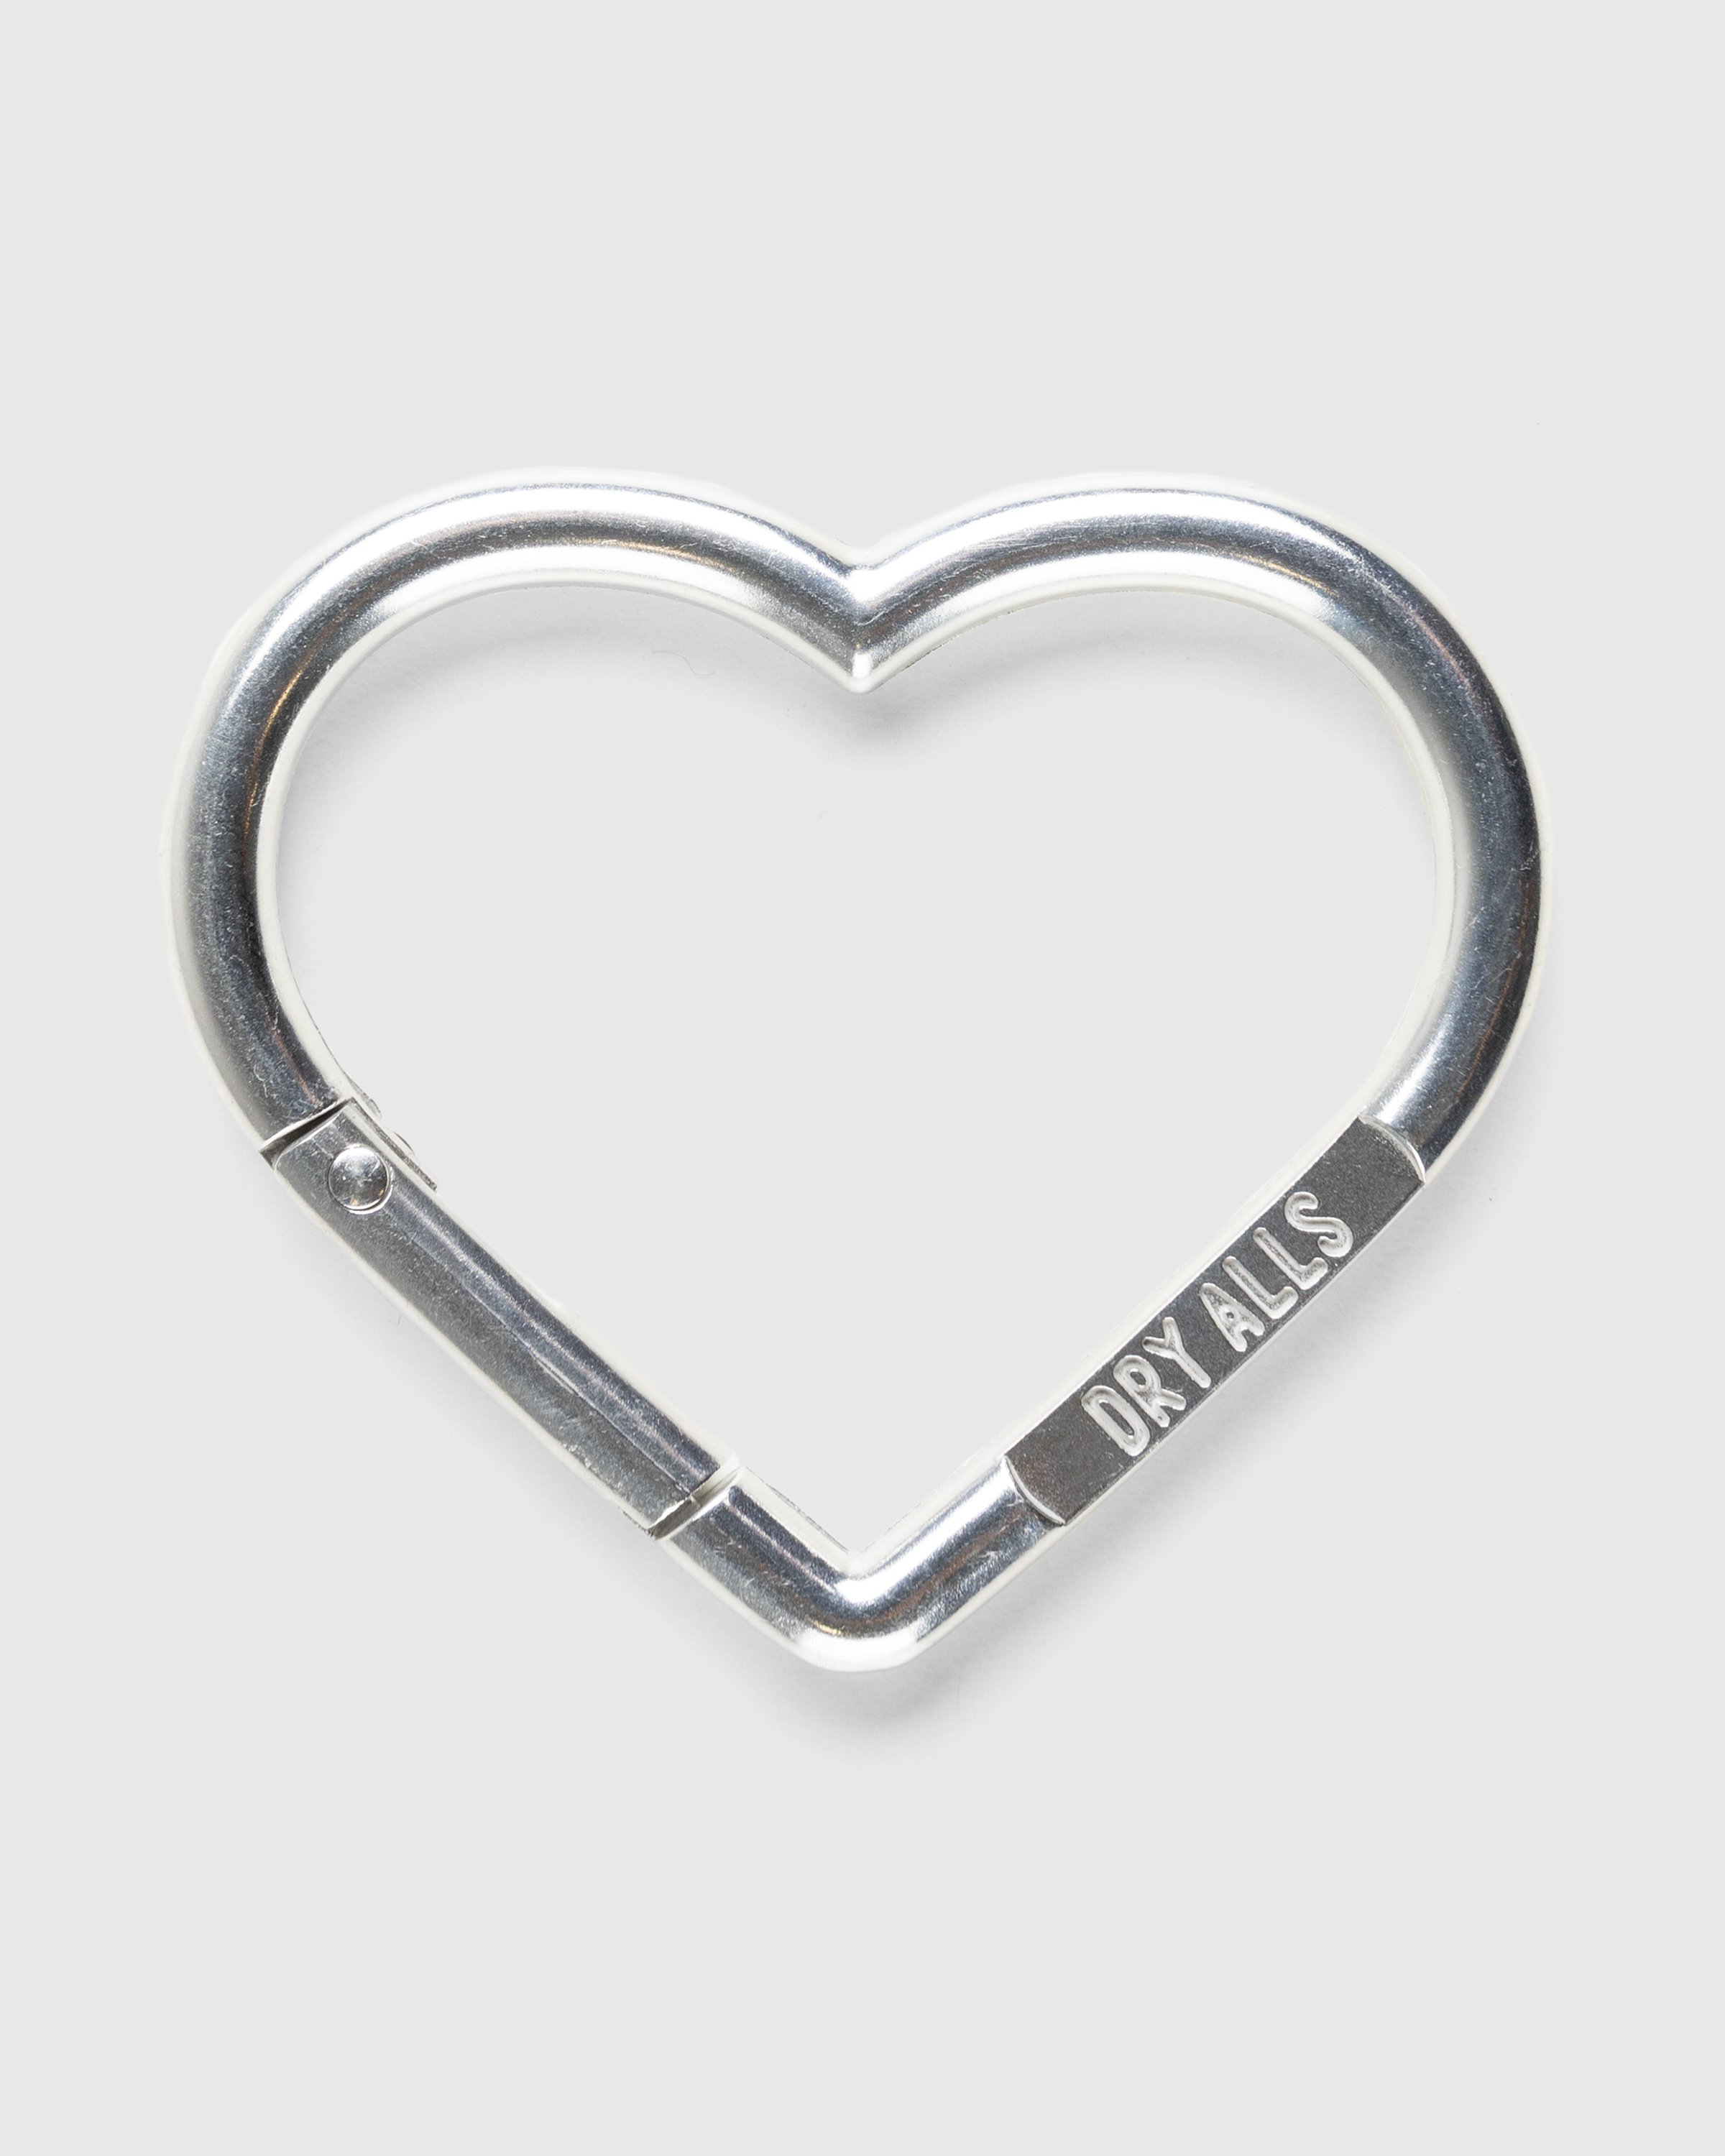 Human Made - HEART CARABINER SILVER - Accessories - Silver - Image 2